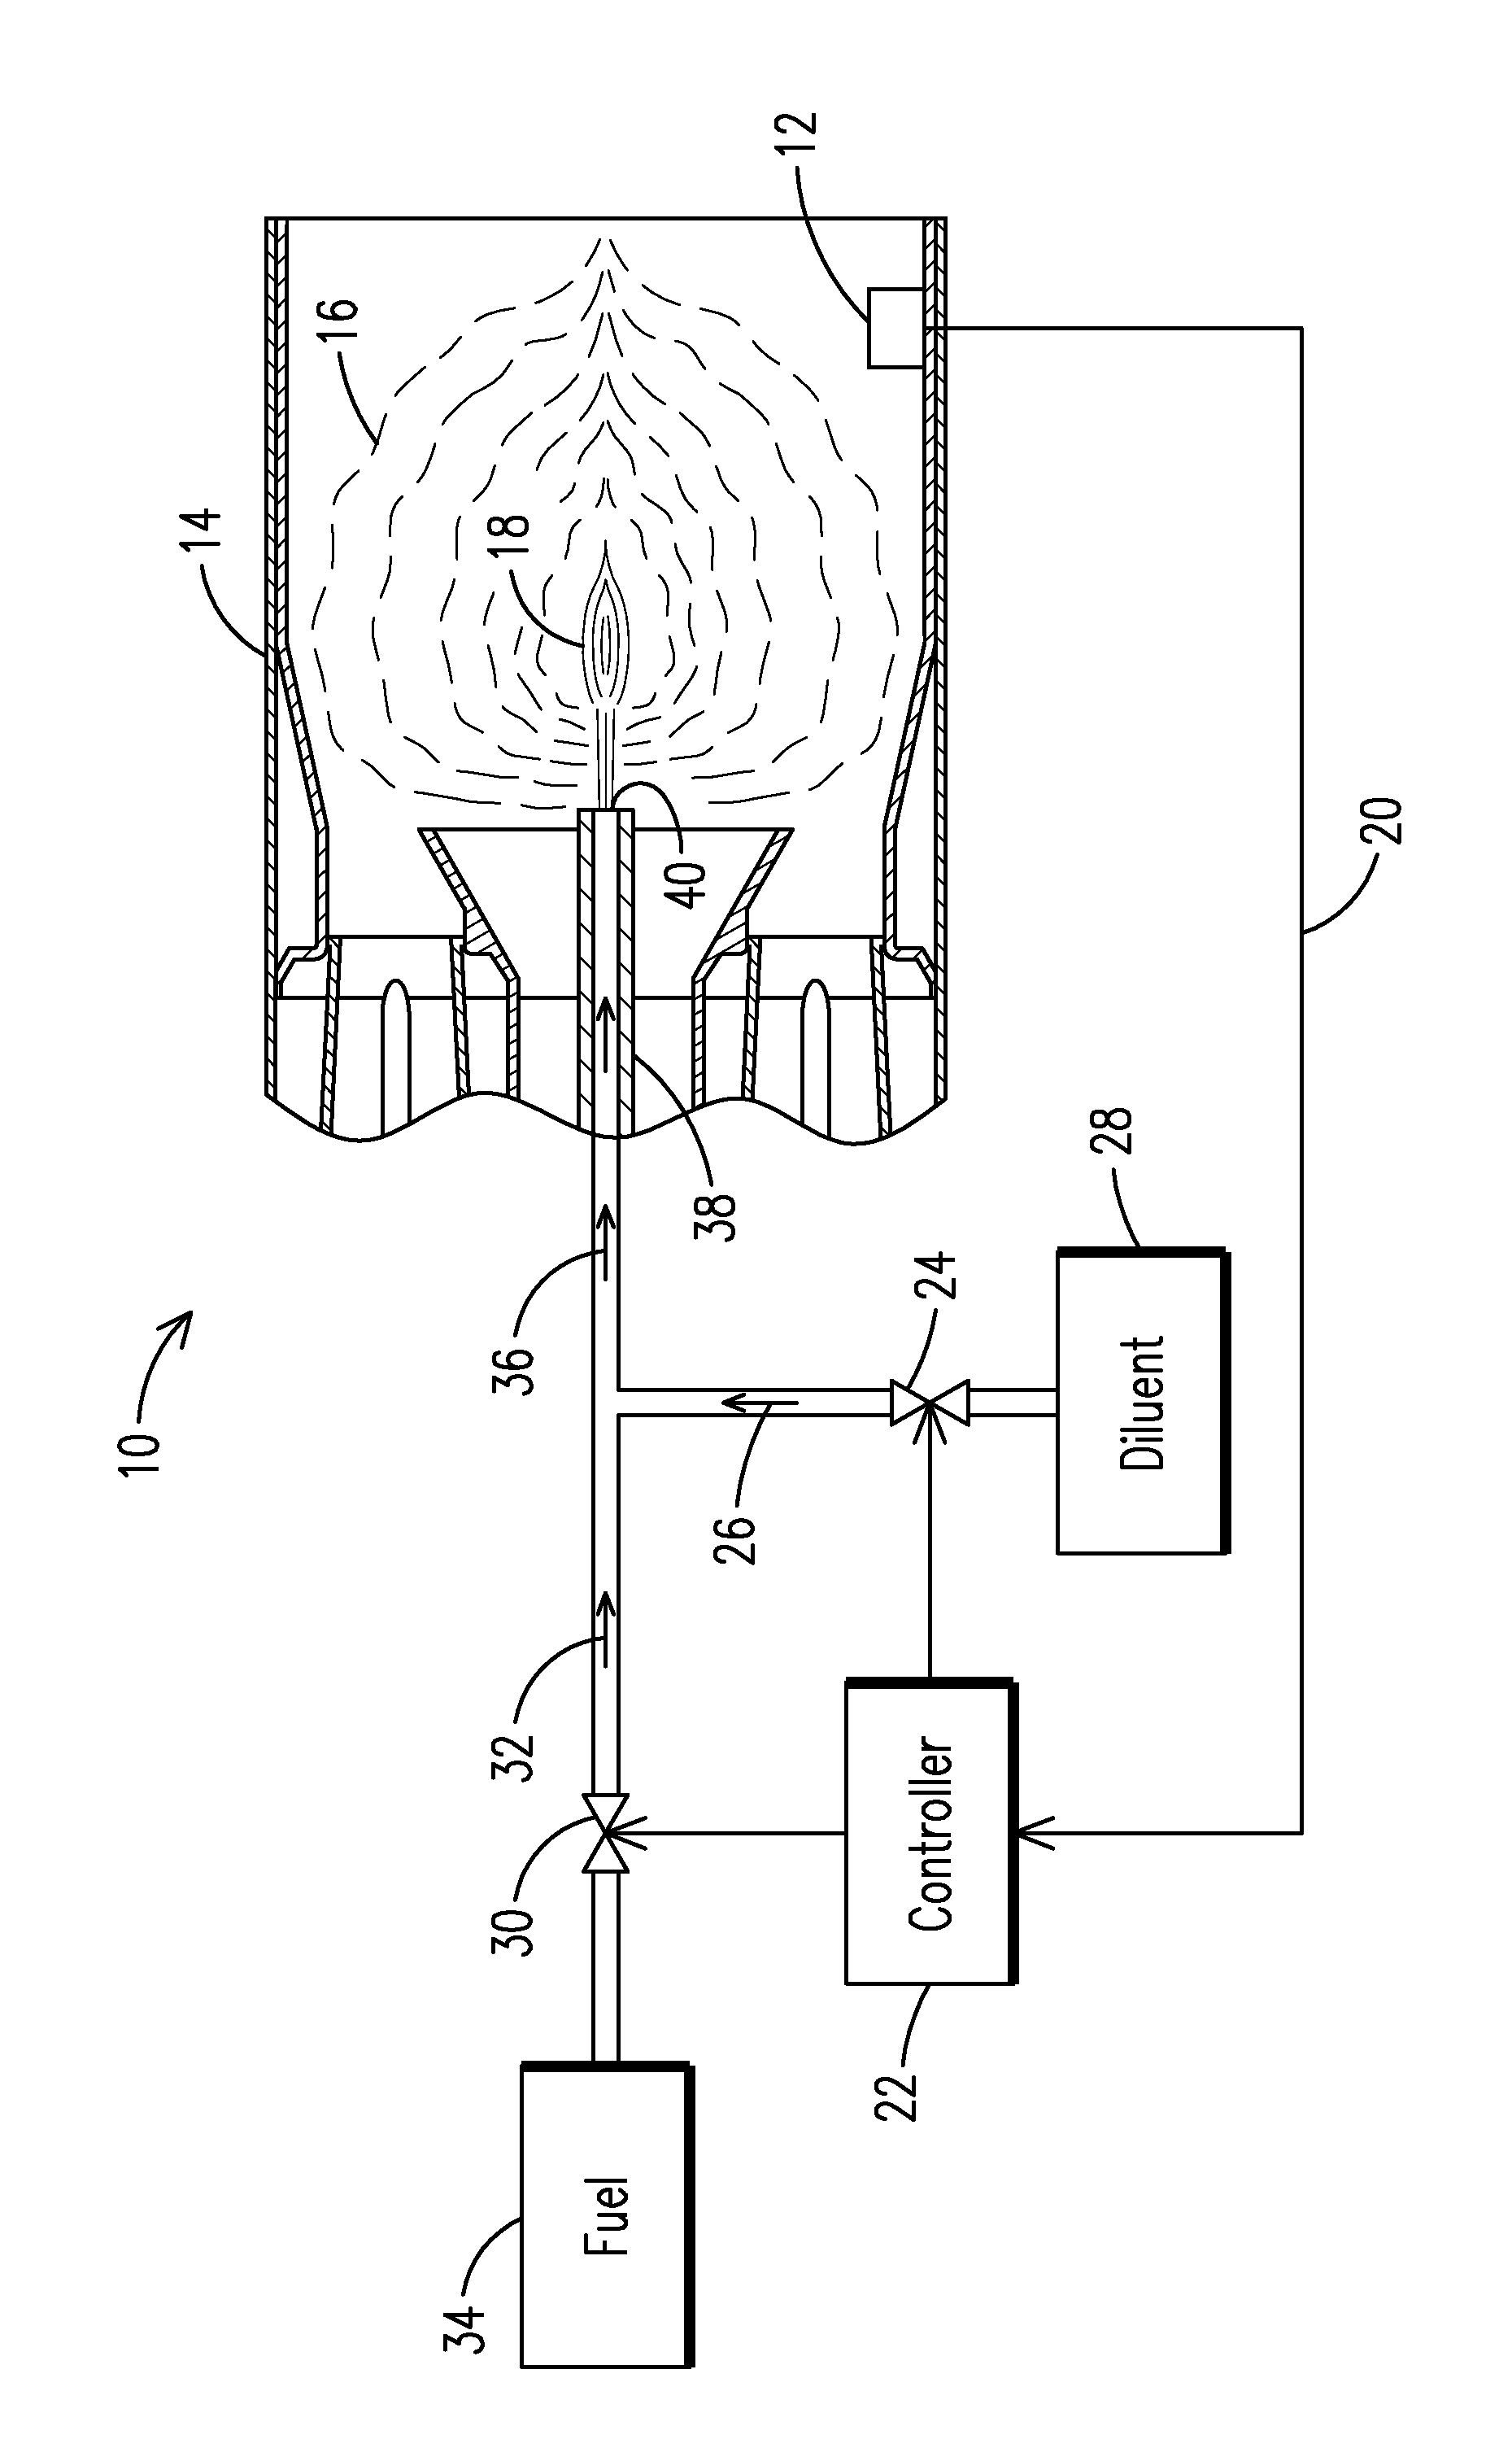 Utilizing a diluent to lower combustion instabilities in a gas turbine engine